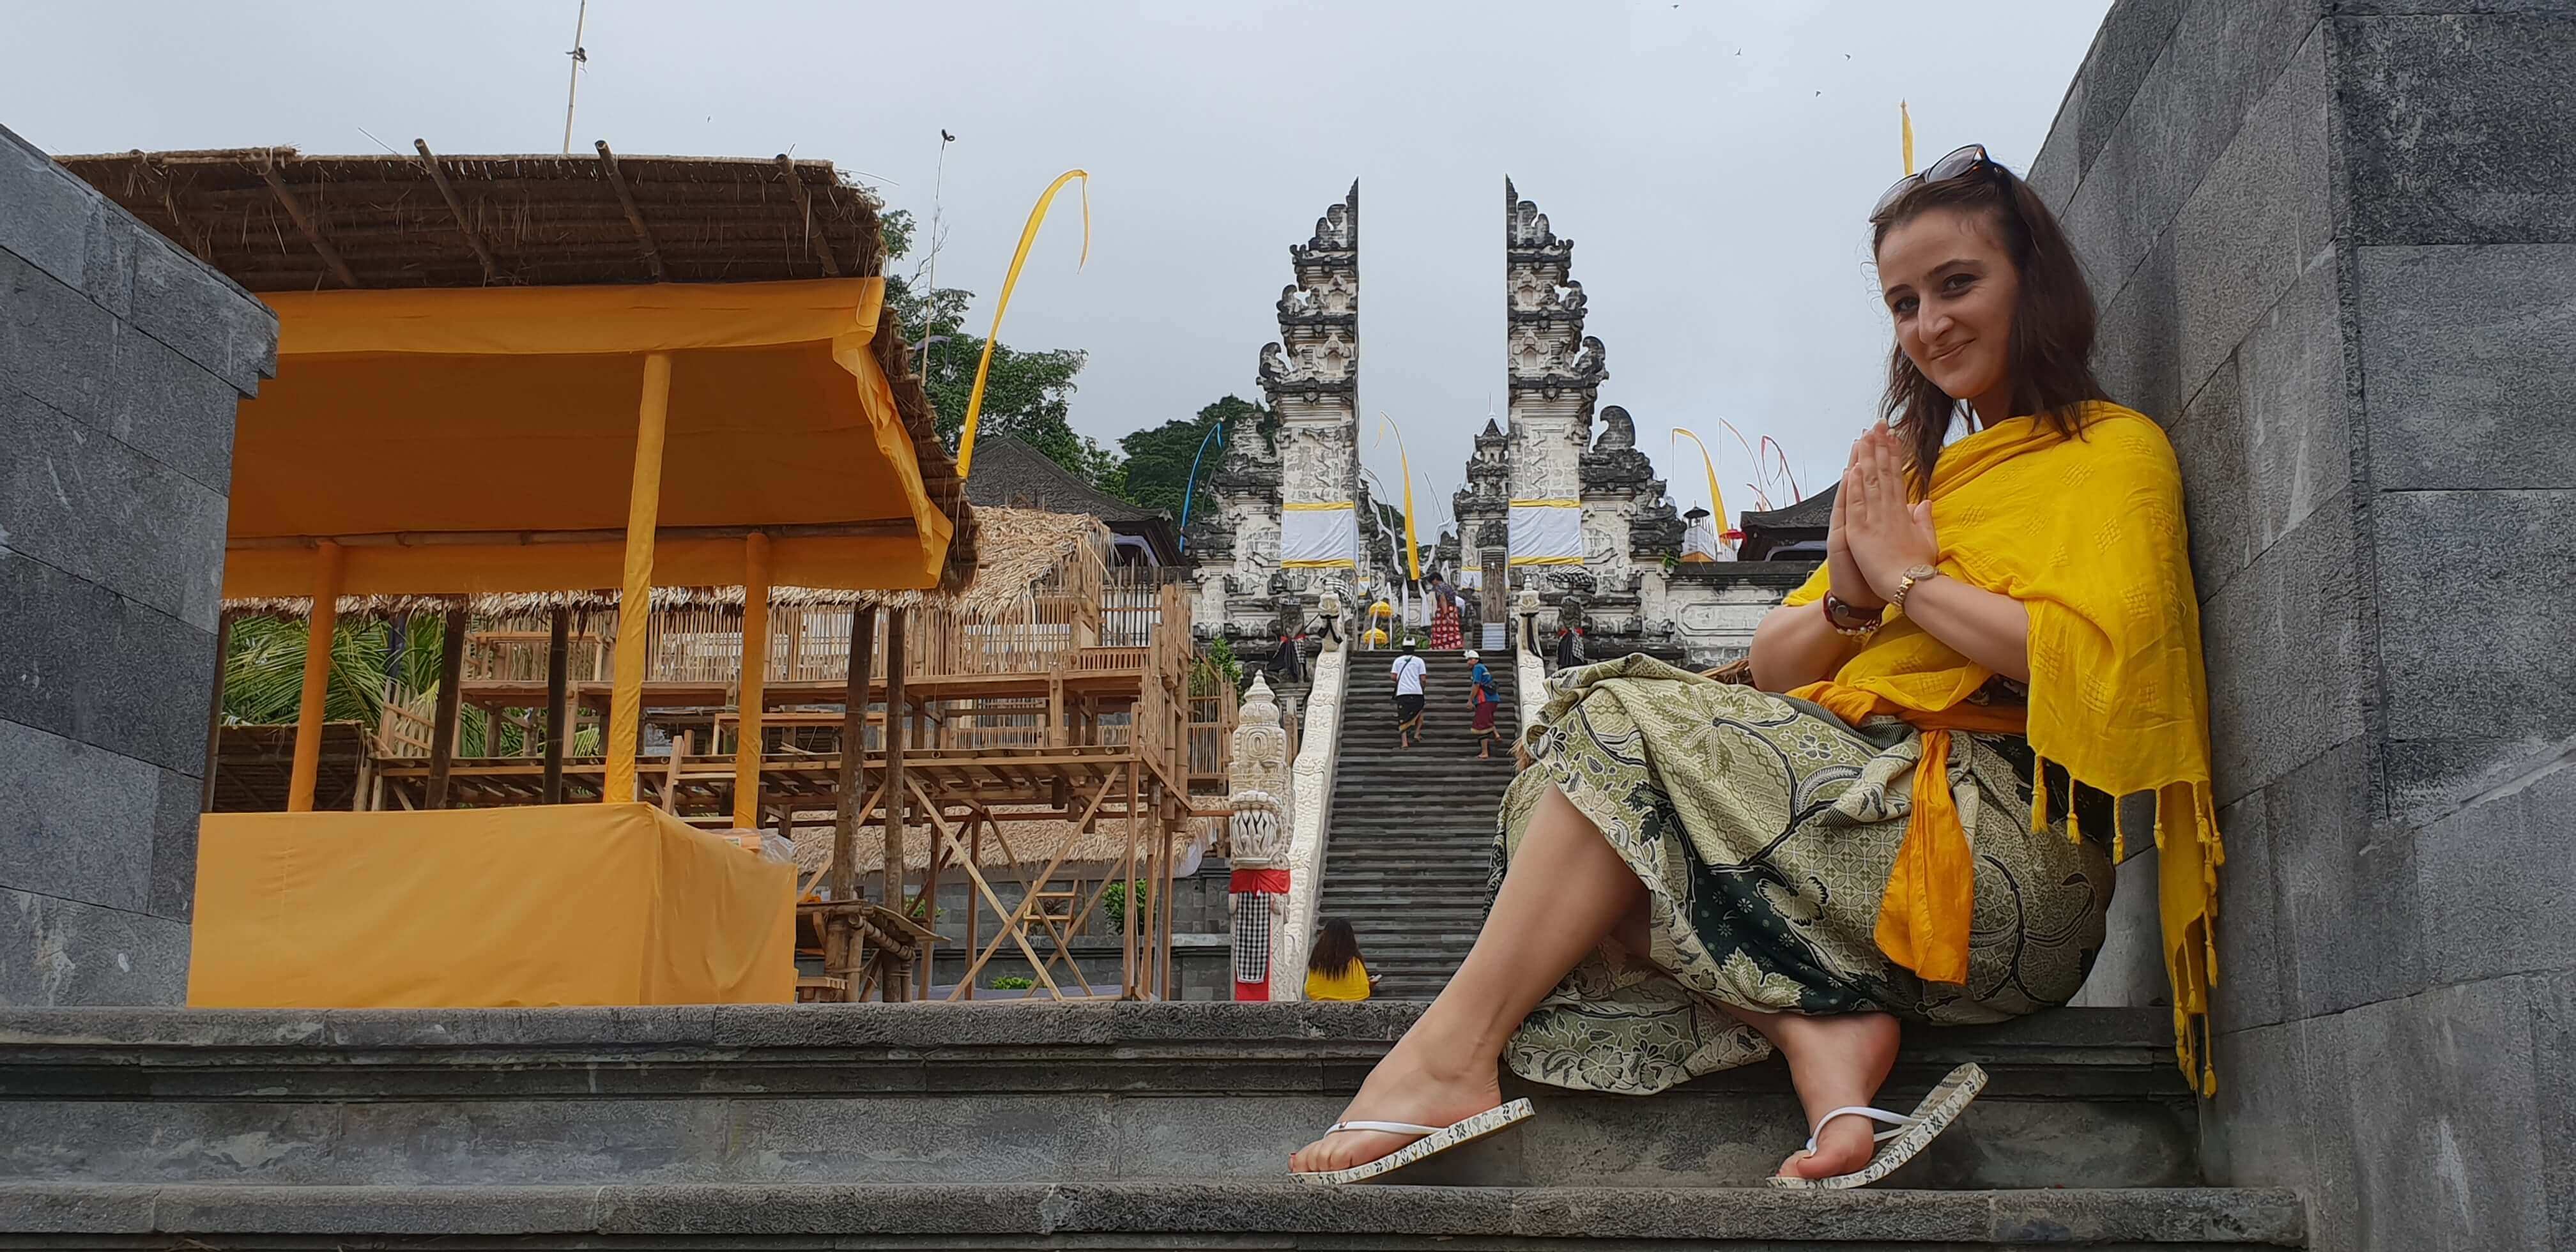 My friend Marinela being the brand ambassador of the sarong at the temple